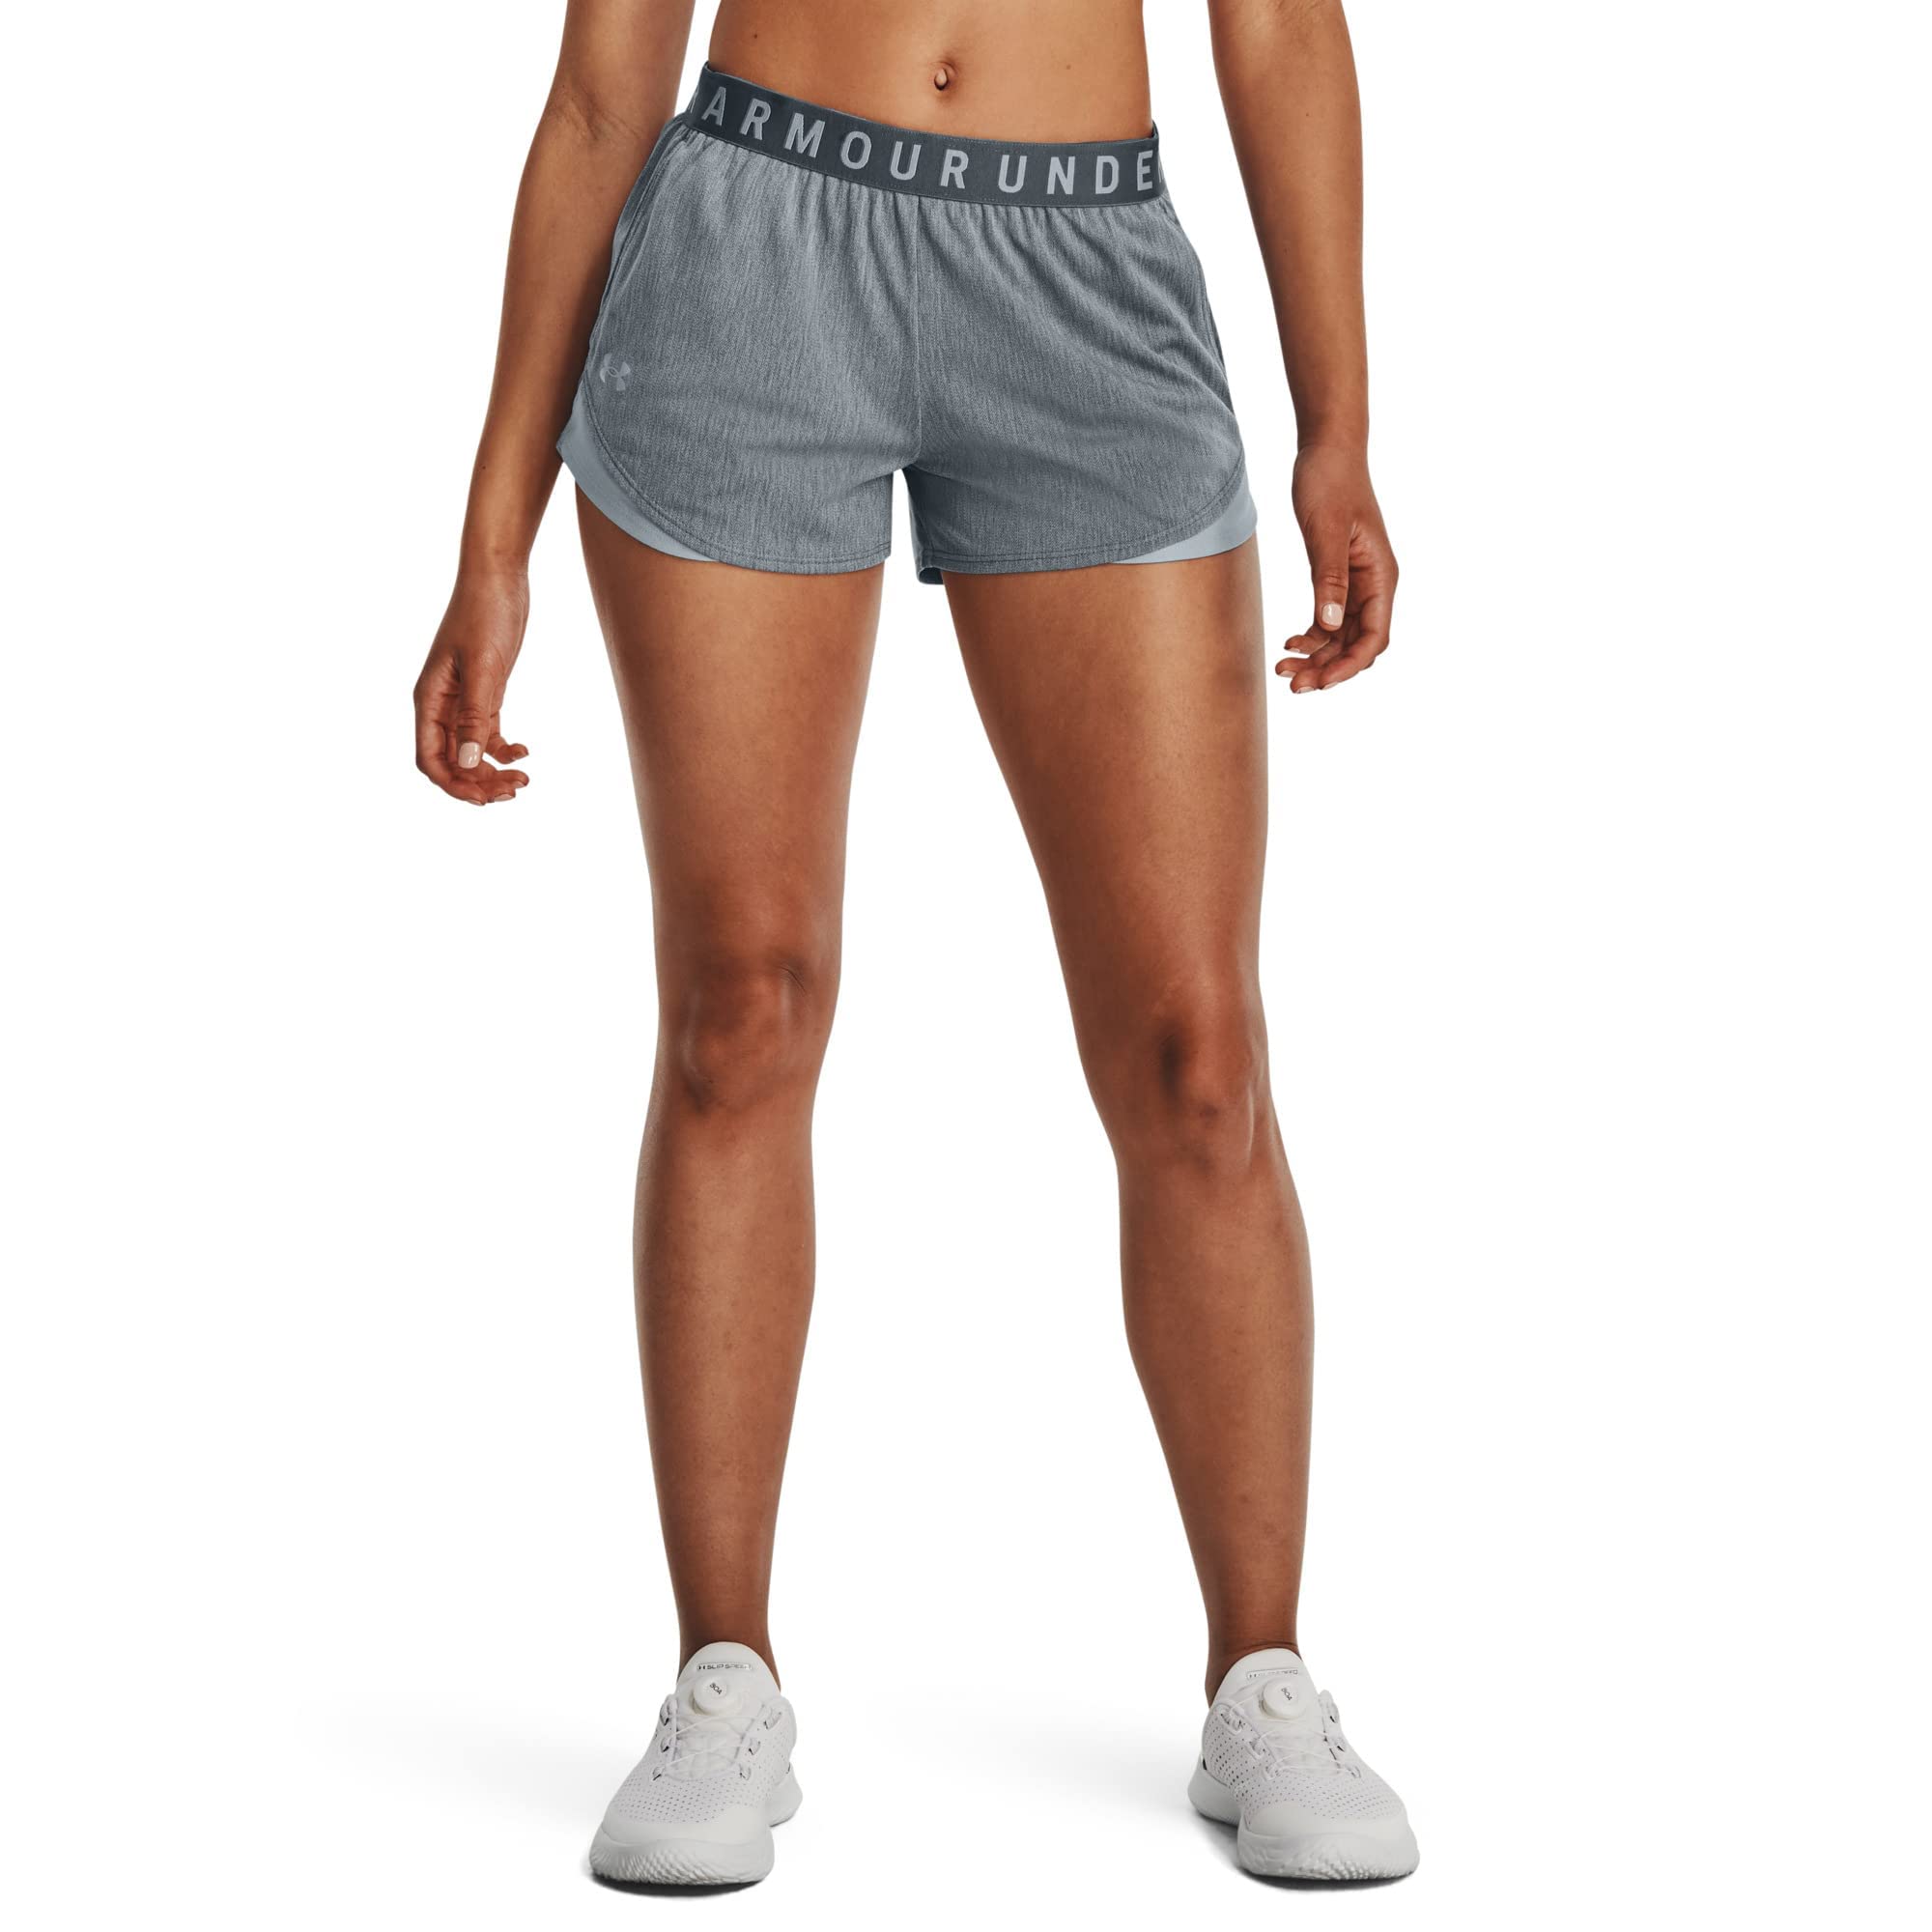 Under Armour Women's Play Up Twist Shorts 3.0